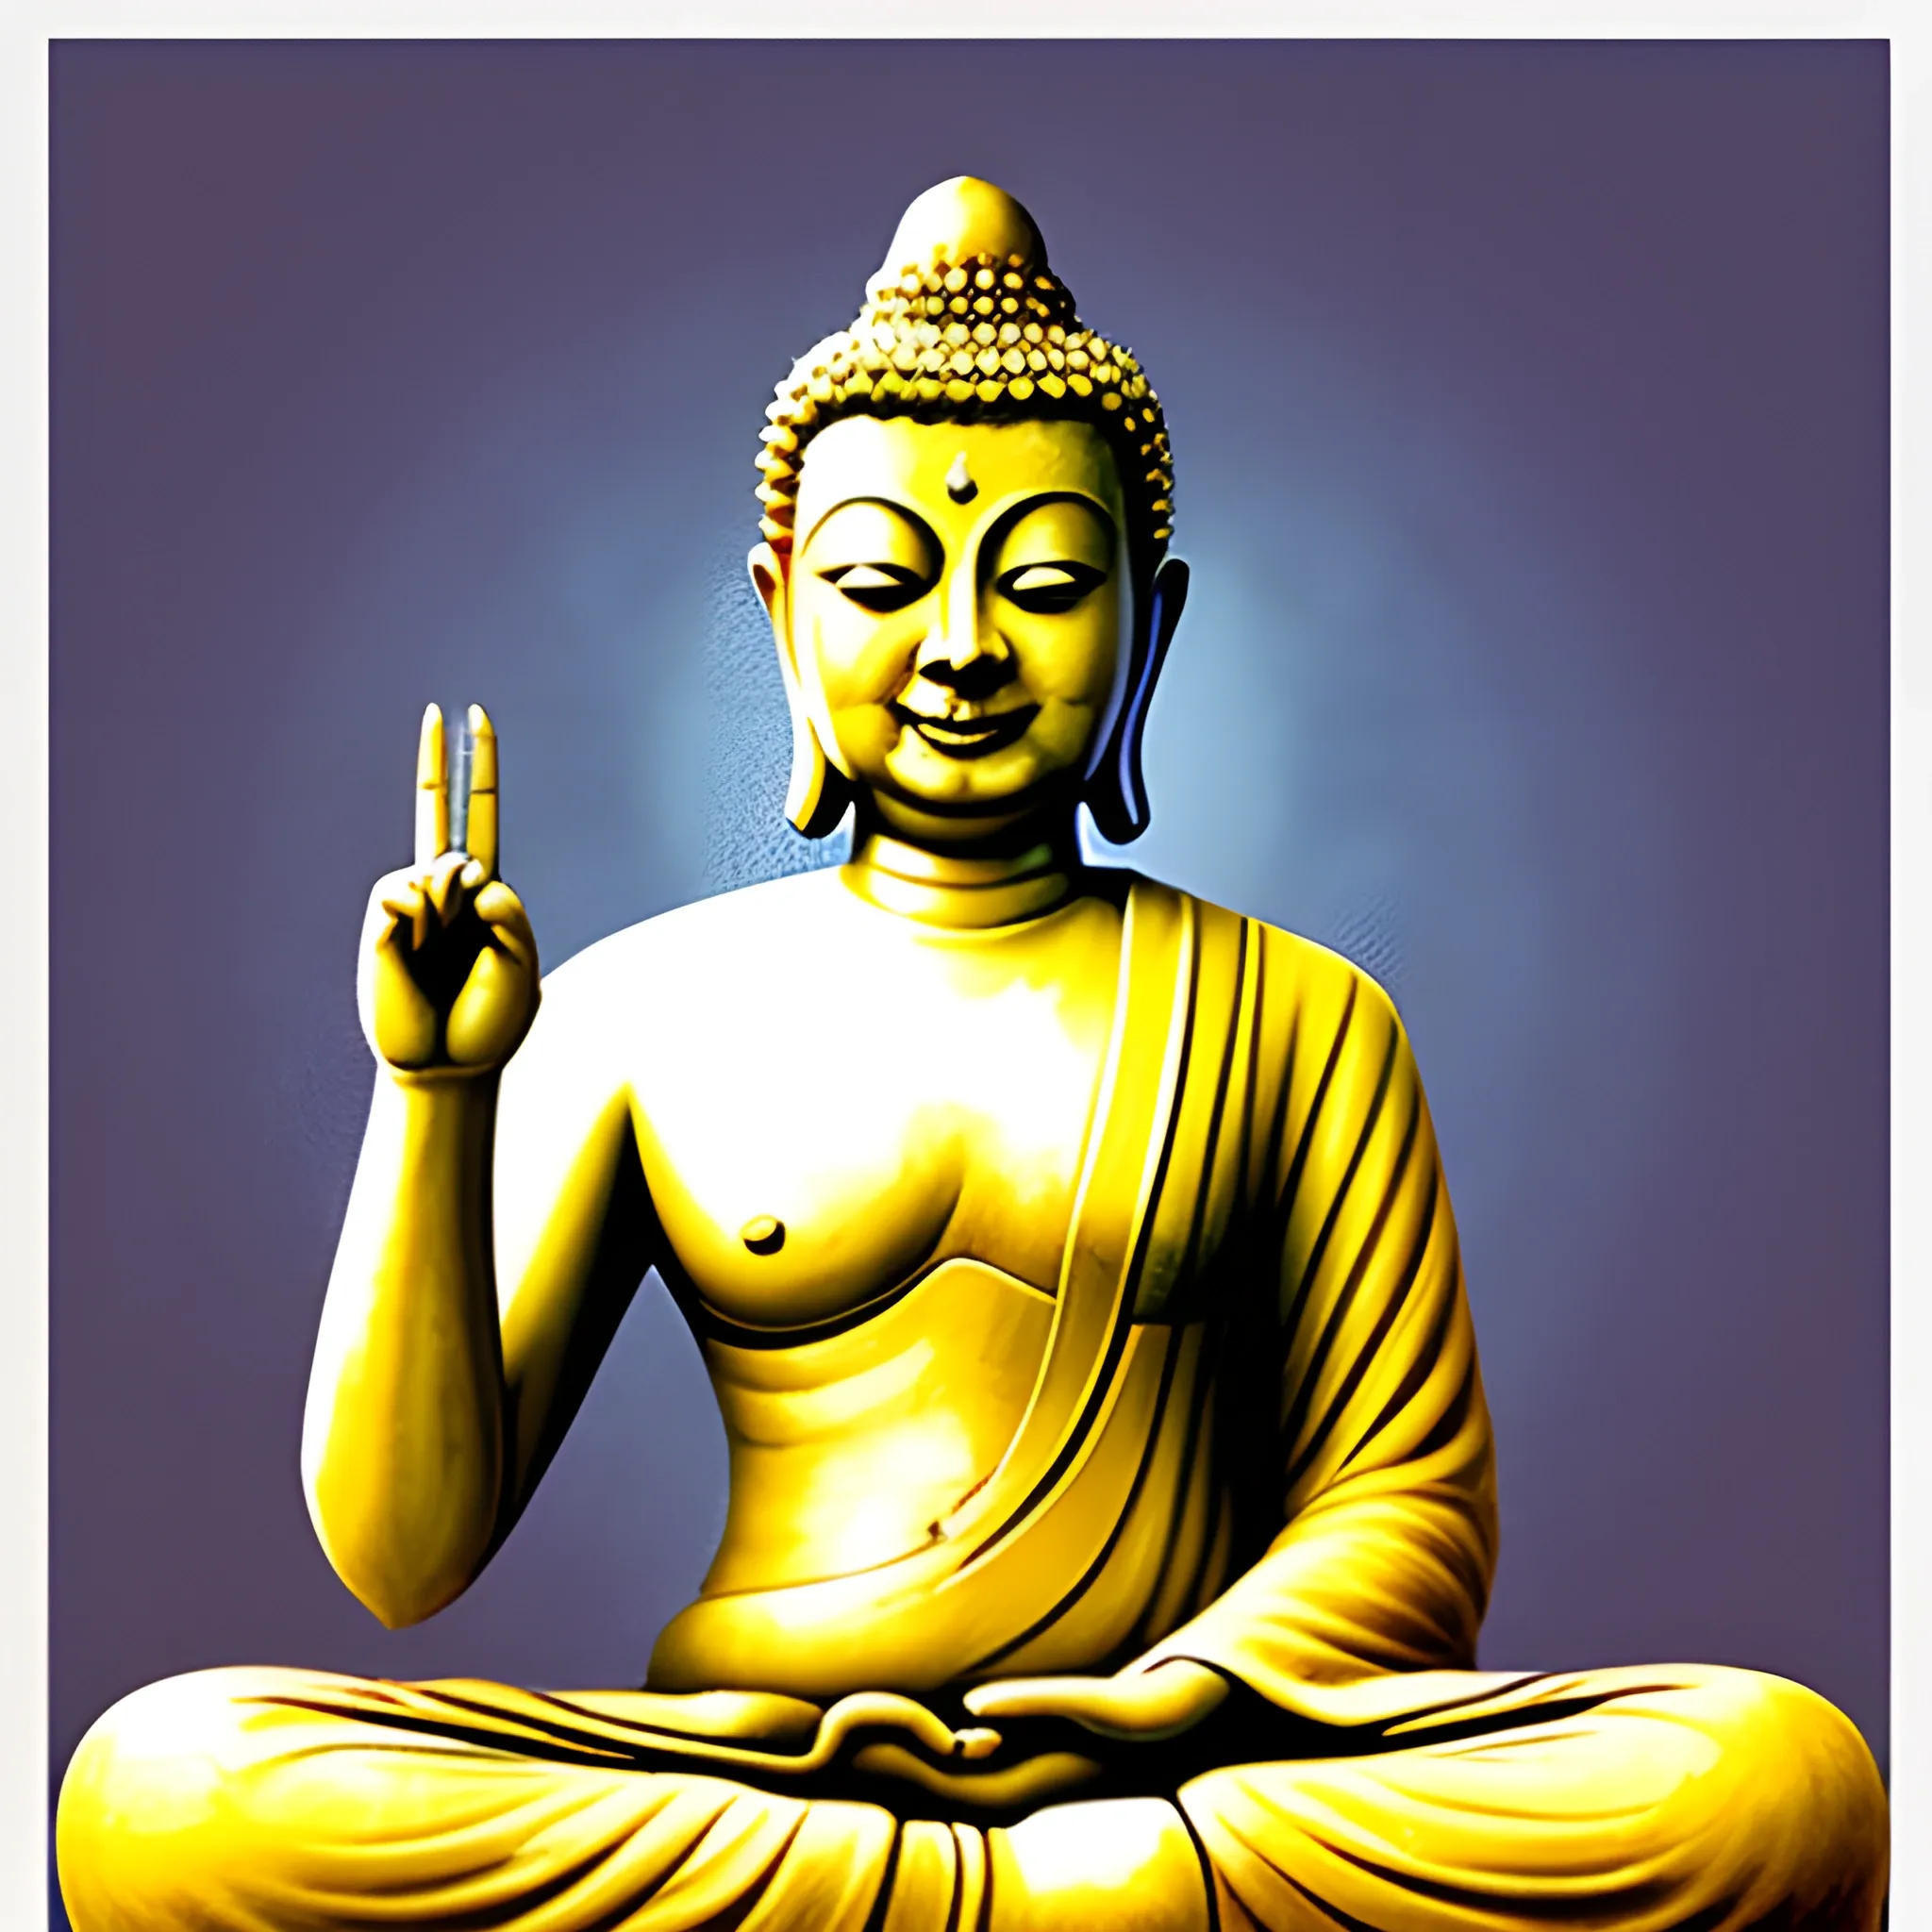 Buddha, nigger and the middle finger is raised